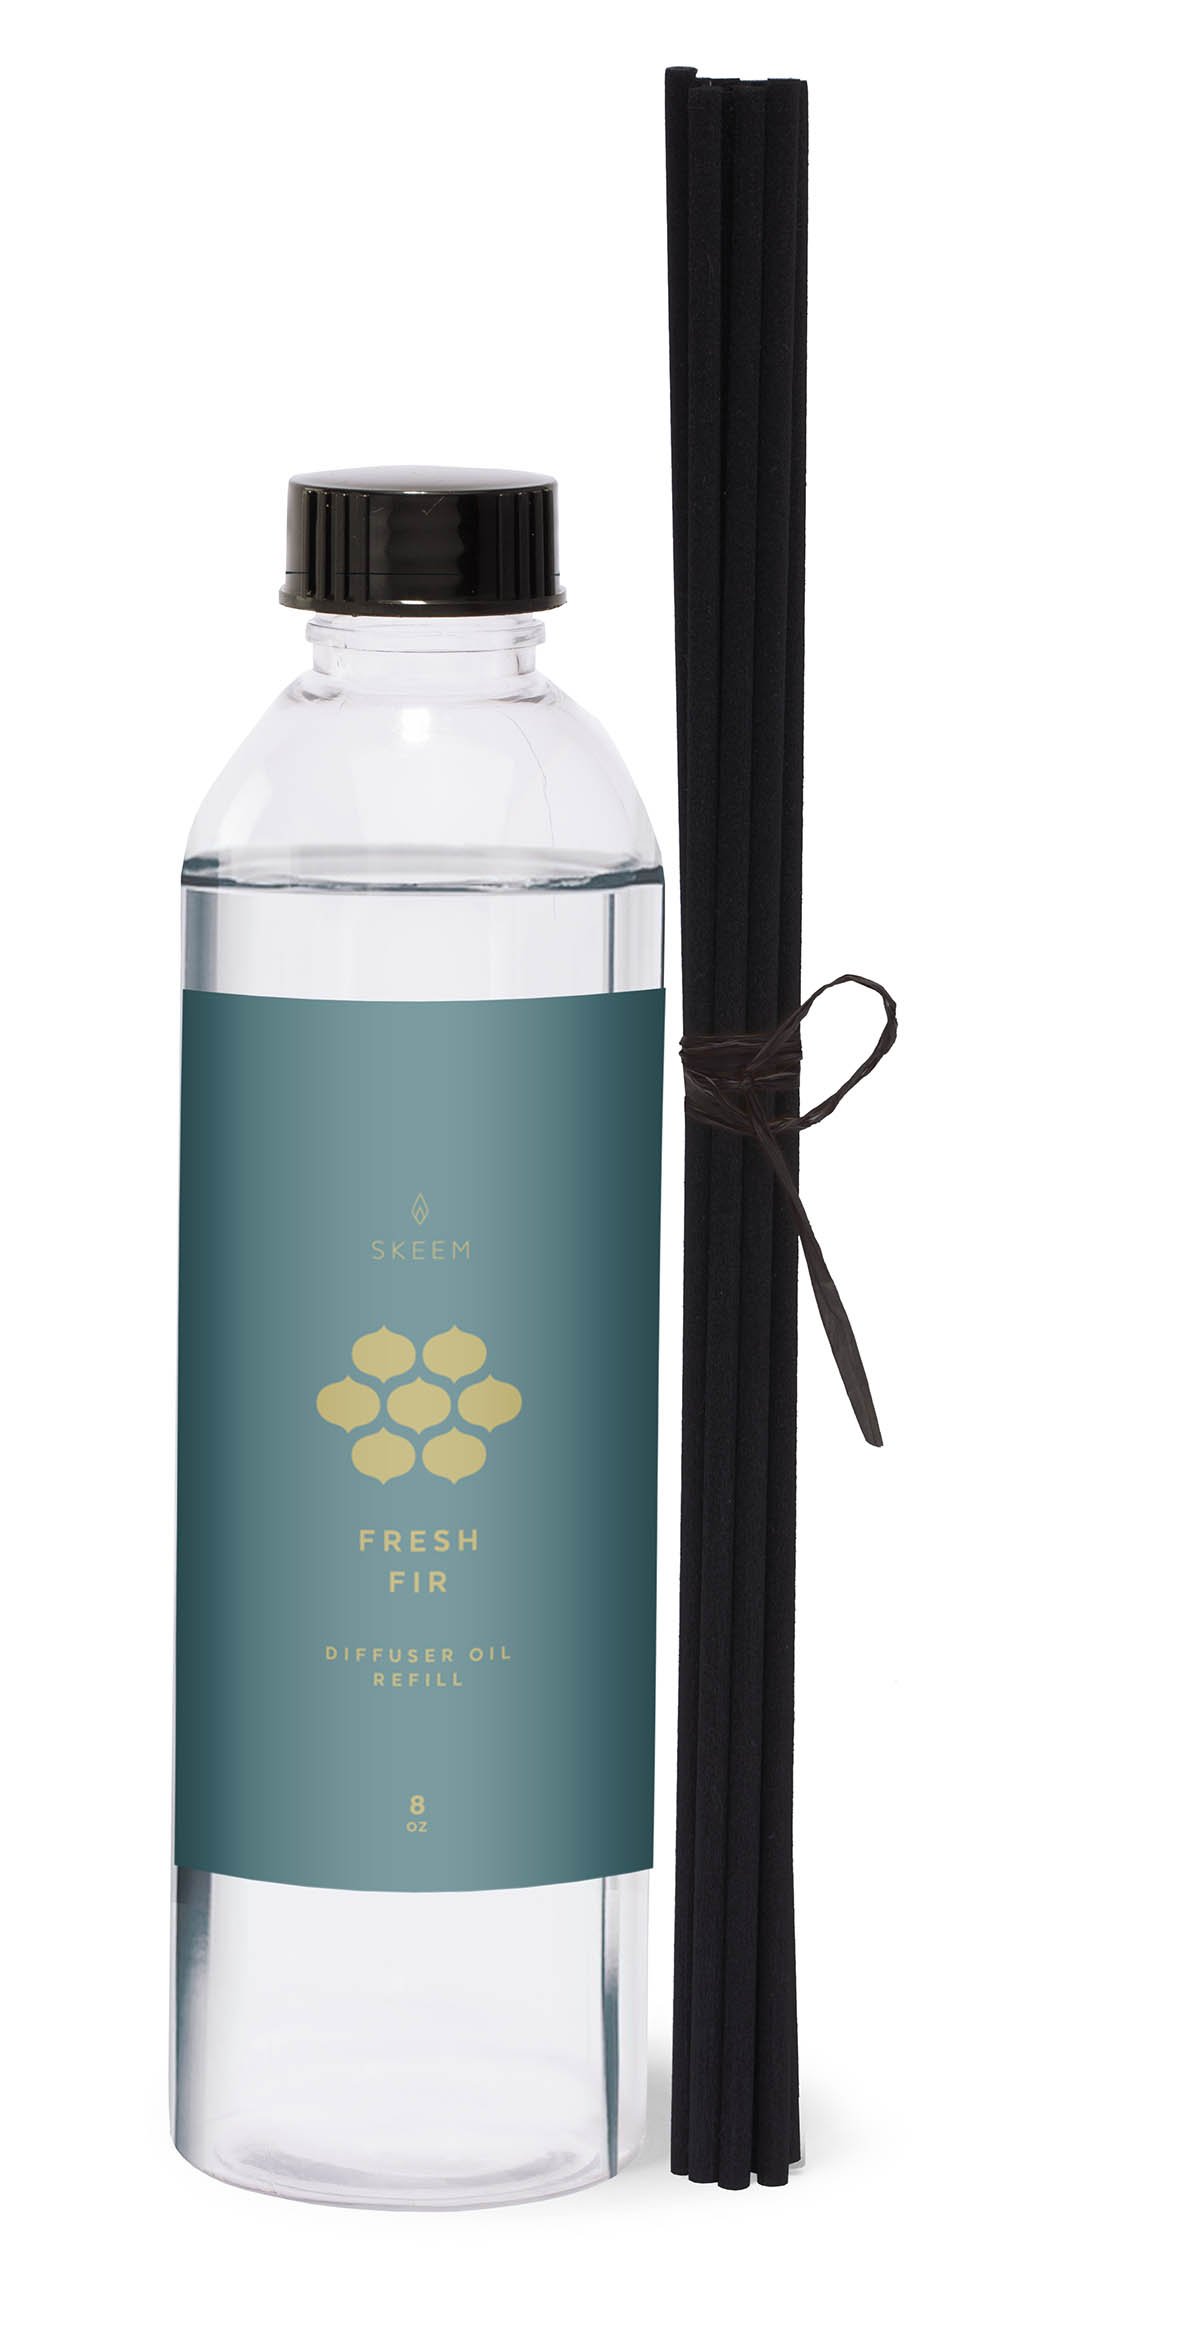 Diffuser Fragrance and Reeds